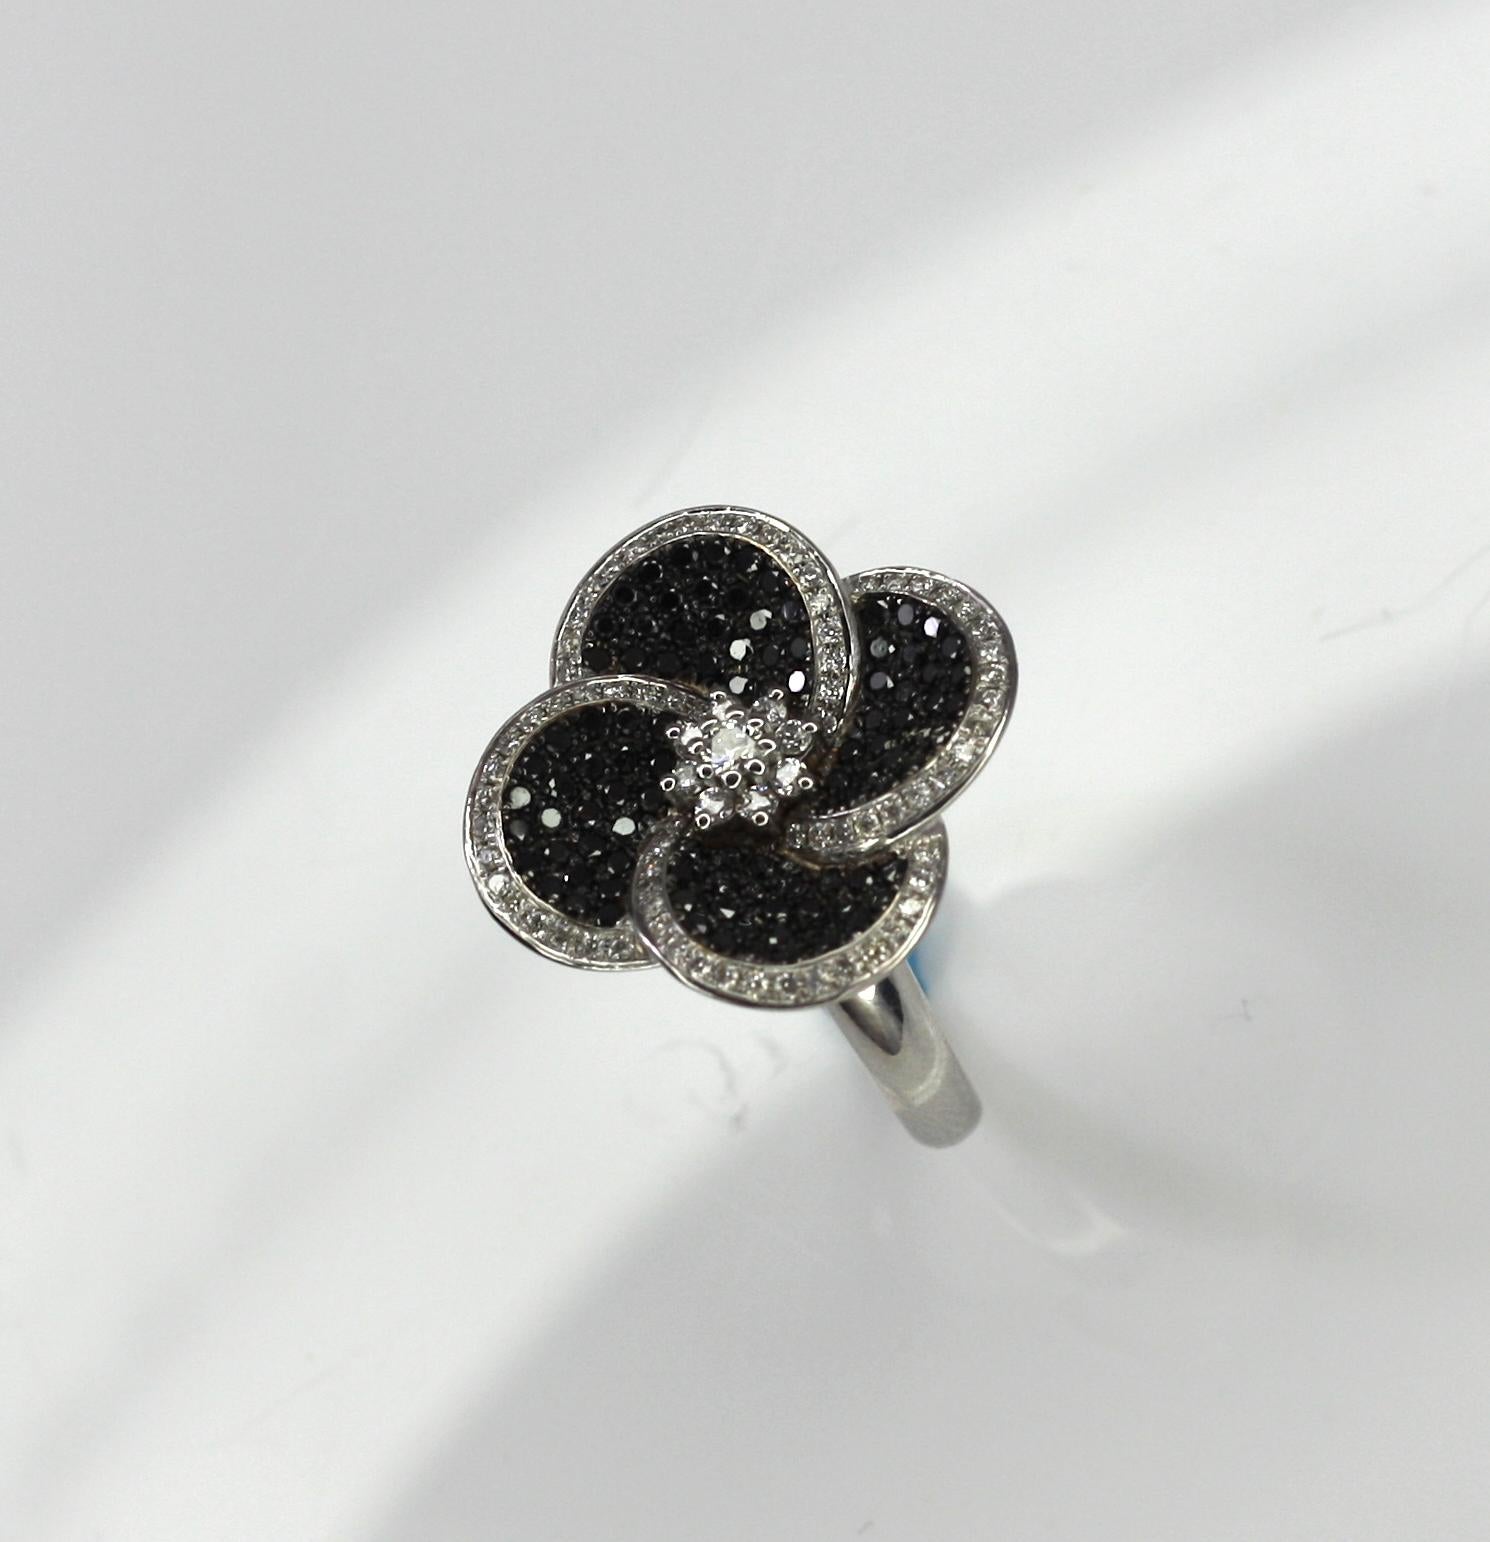 S.Georgios Floral 18 Karat White gold ring is all handmade and is decorated with Brilliant cut Diamonds shaped like flower petals. The Black diamonds are a total weight of 0,70 Carats and the white diamonds a total weight of 0.45 Carat. 
This